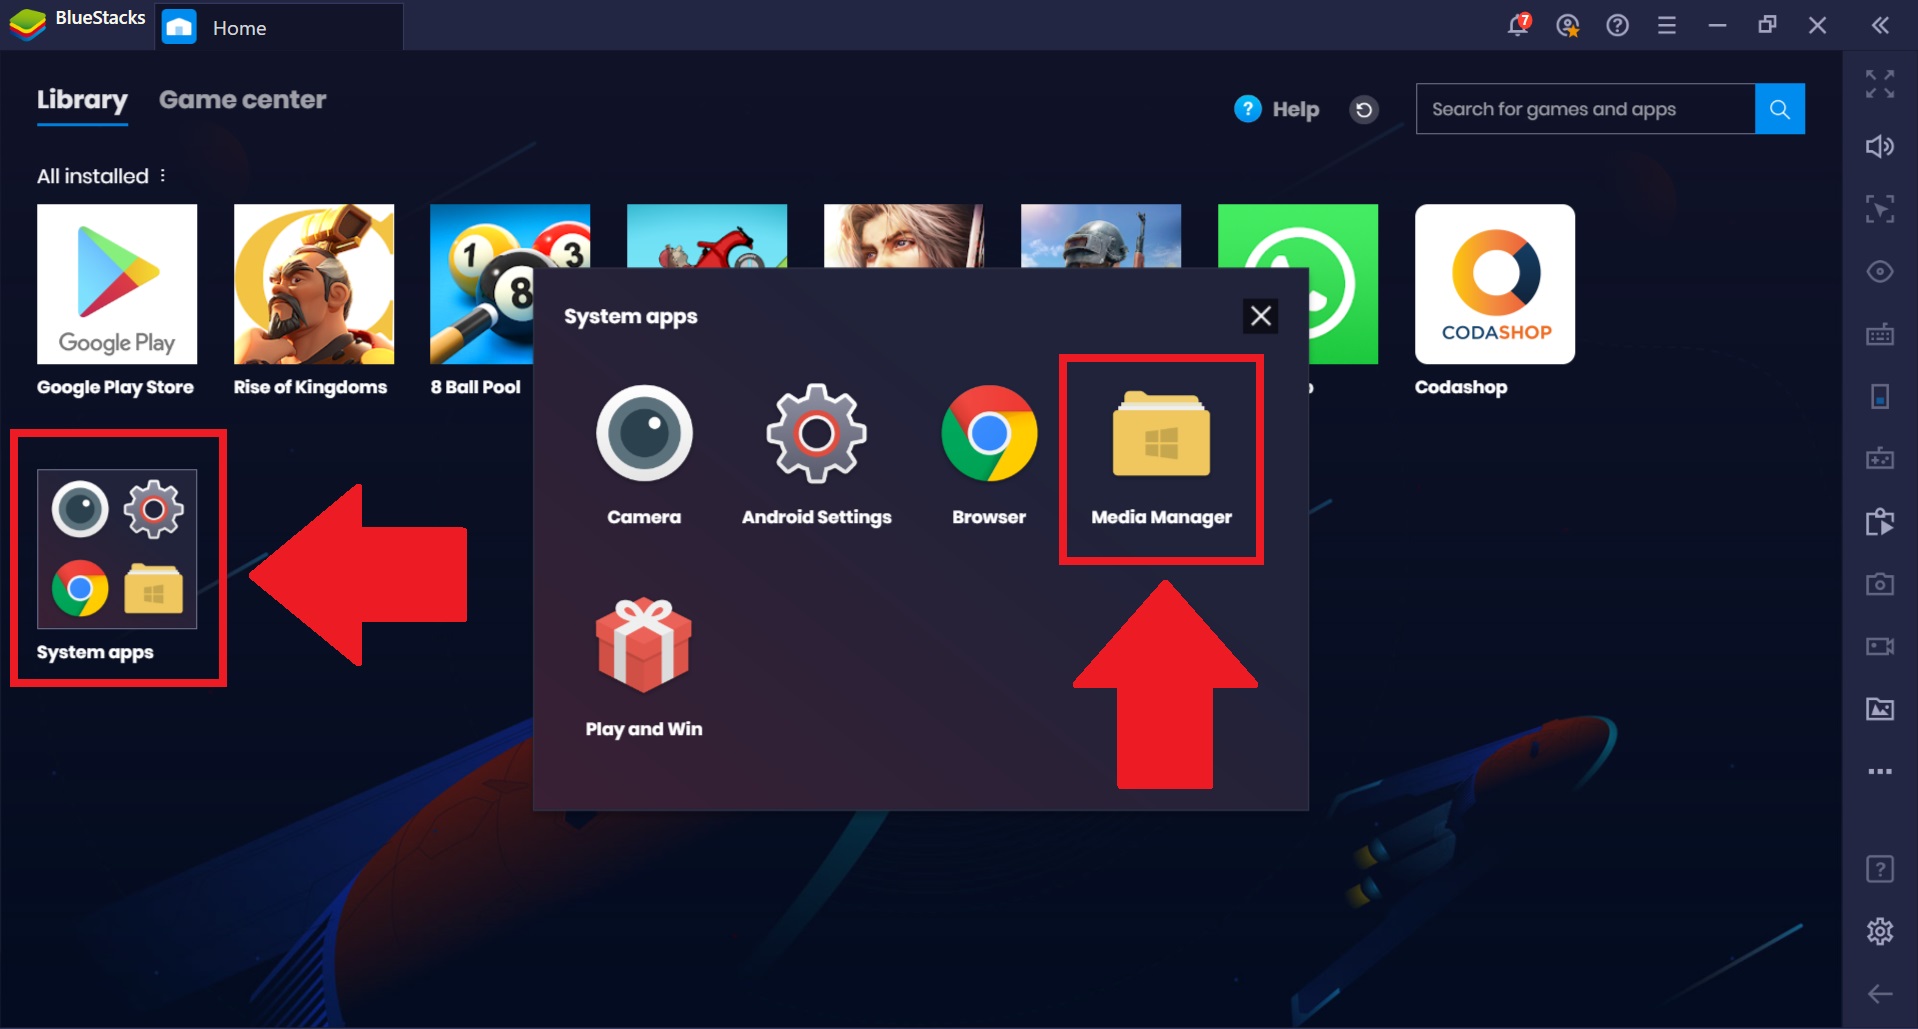 How To Upload Images And Change Status On Whatsapp In Bluestacks 4 Bluestacks Support